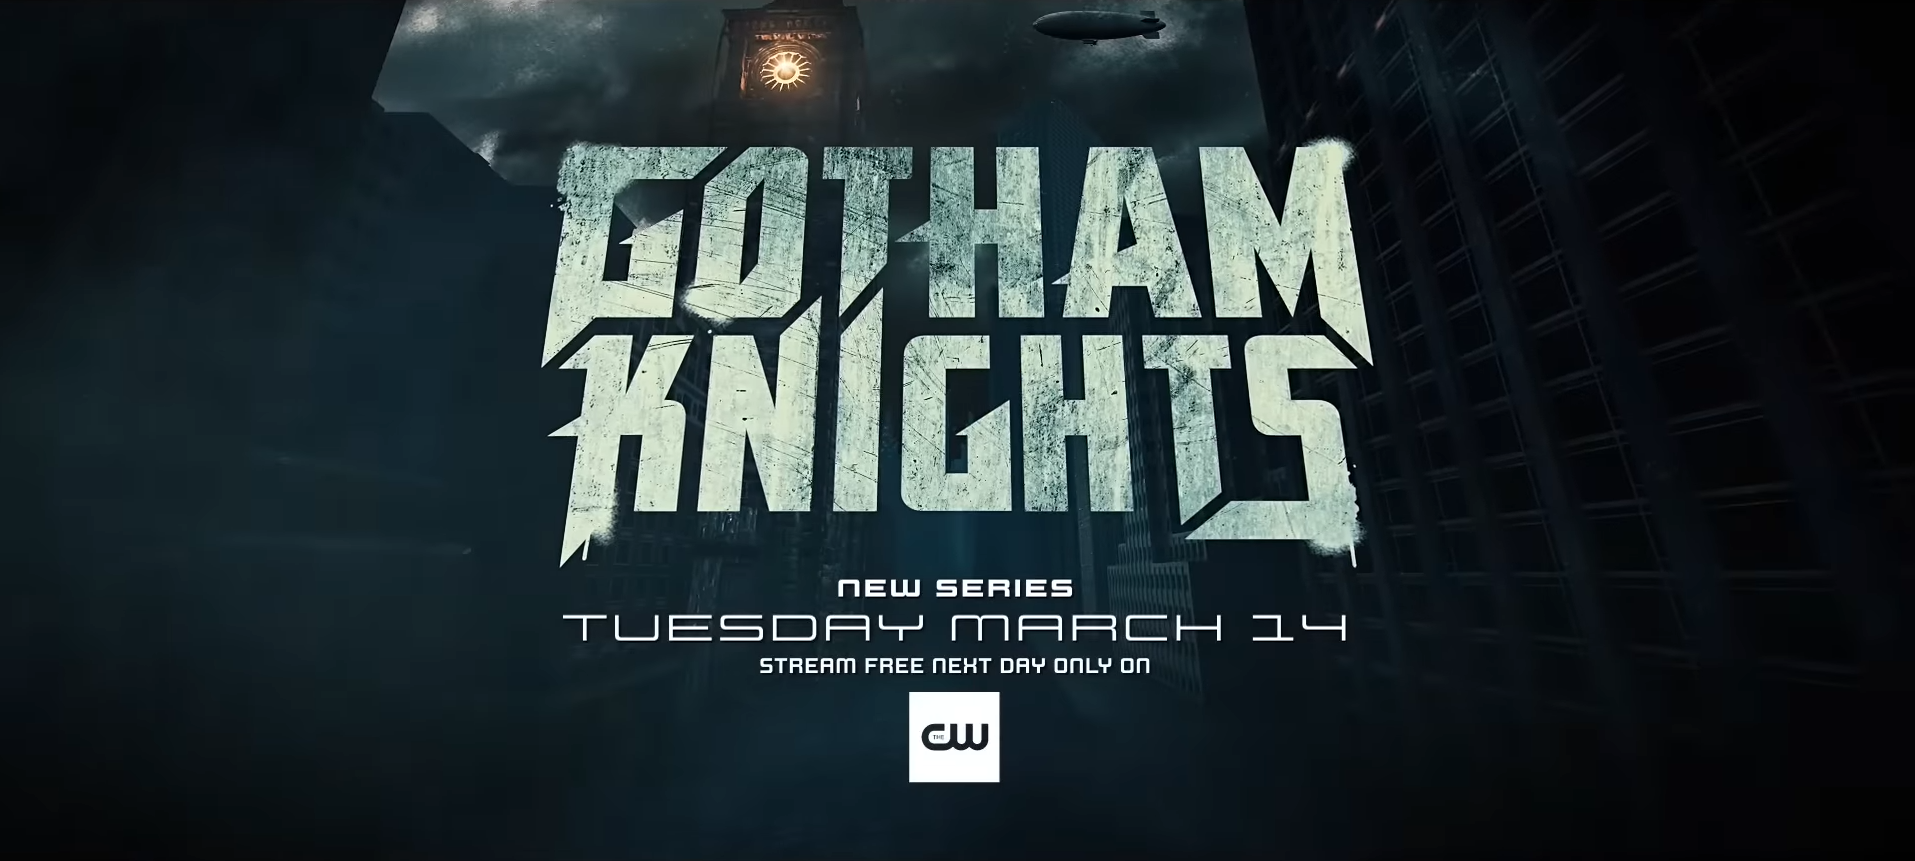 Gotham Knights series in the works at The CW